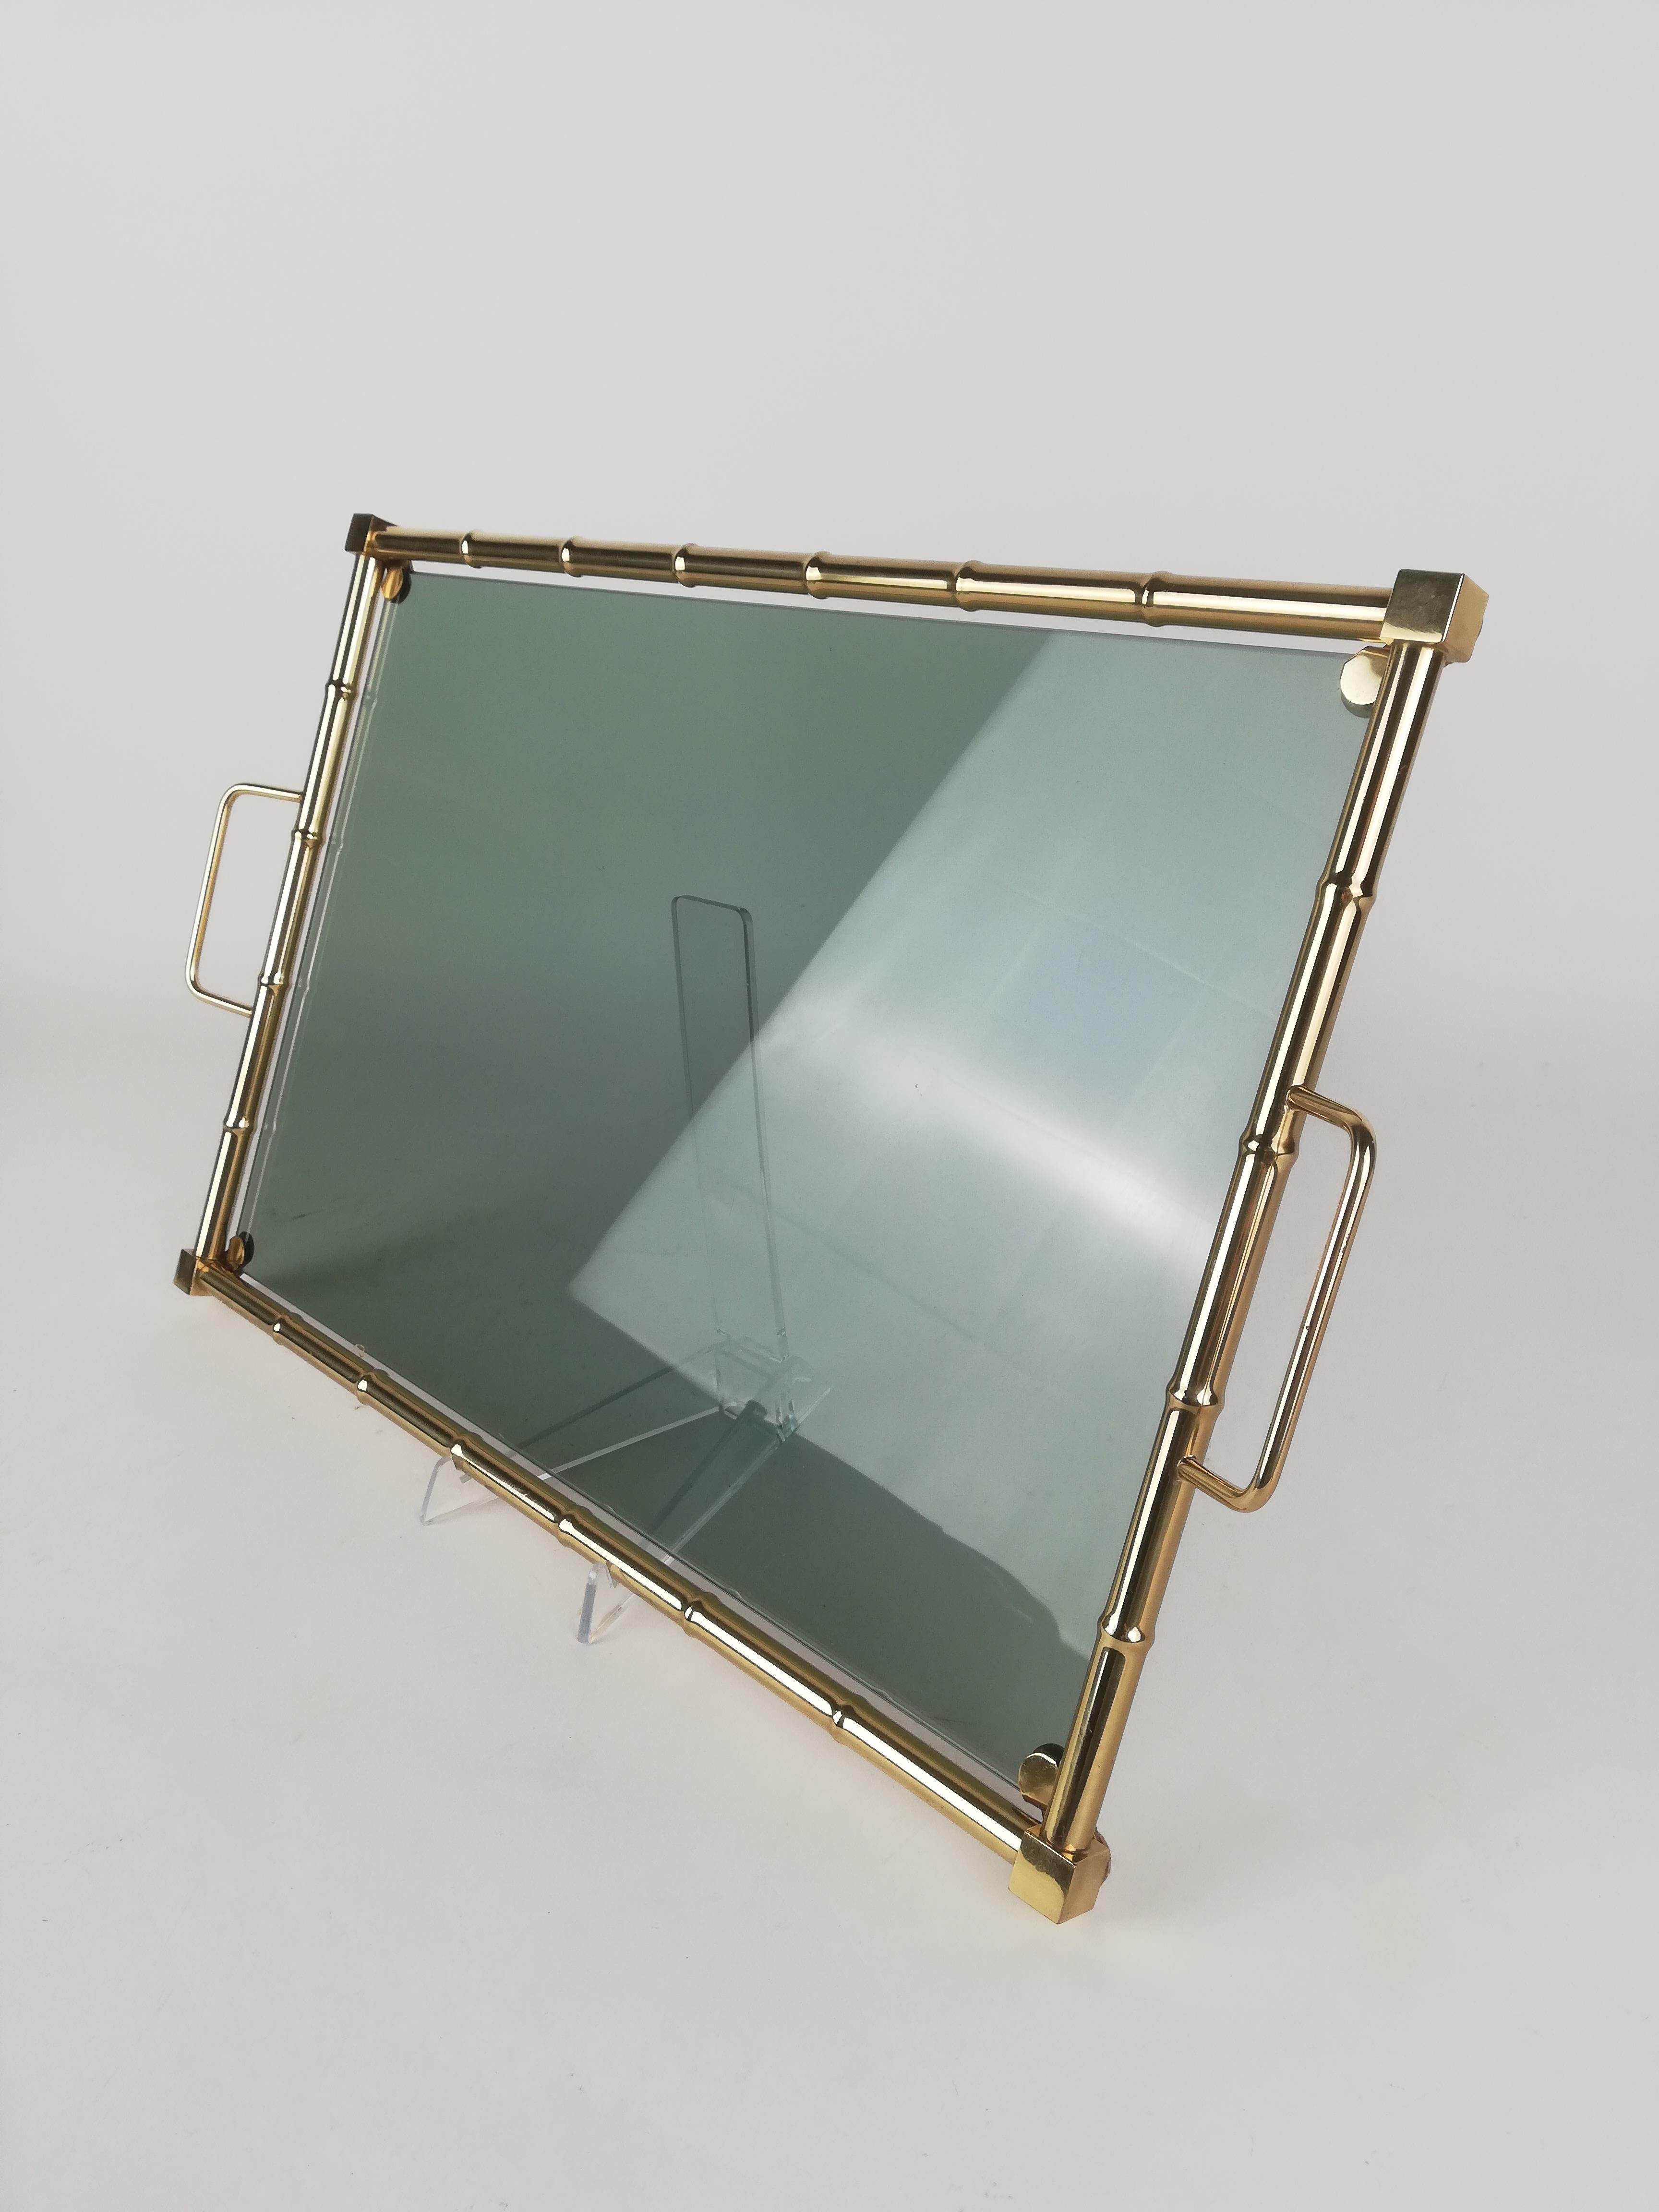 Hollywood Regency Italian Tray in Brass Faux Bamboo and Fumè Glass, 1970s For Sale 2